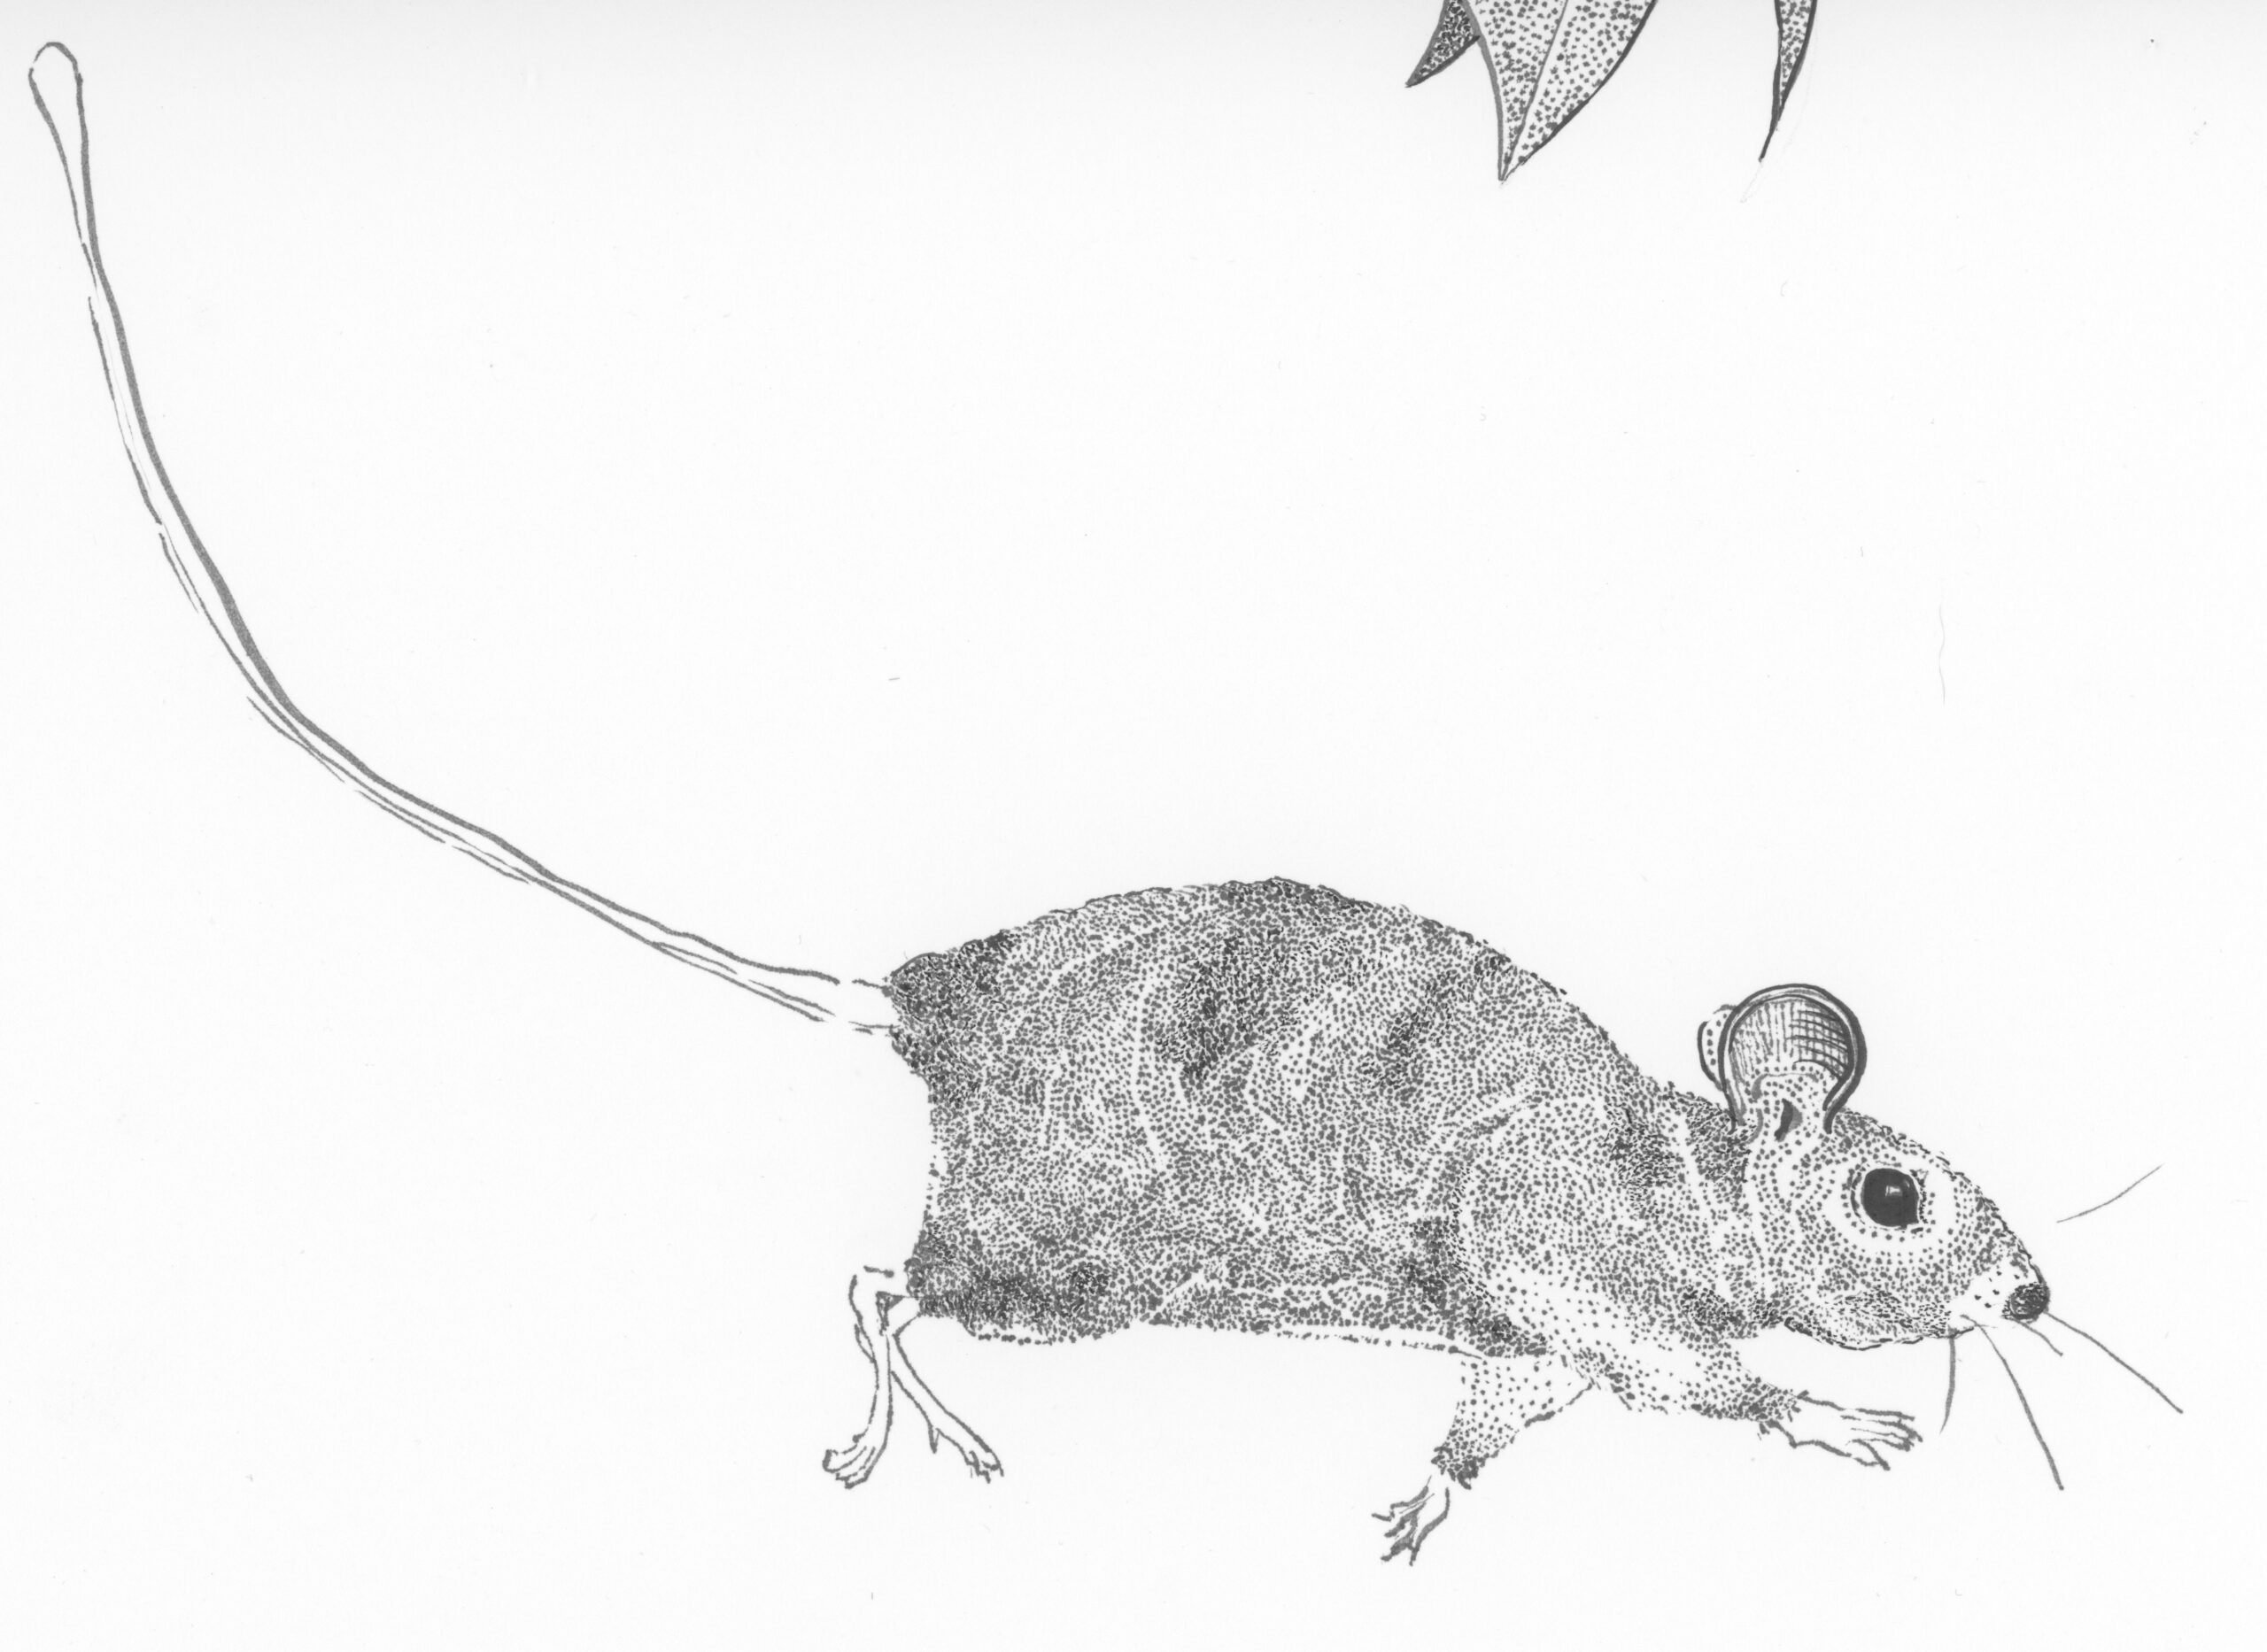 Monochrome ink drawing of a running mouse, with detailed stippling.